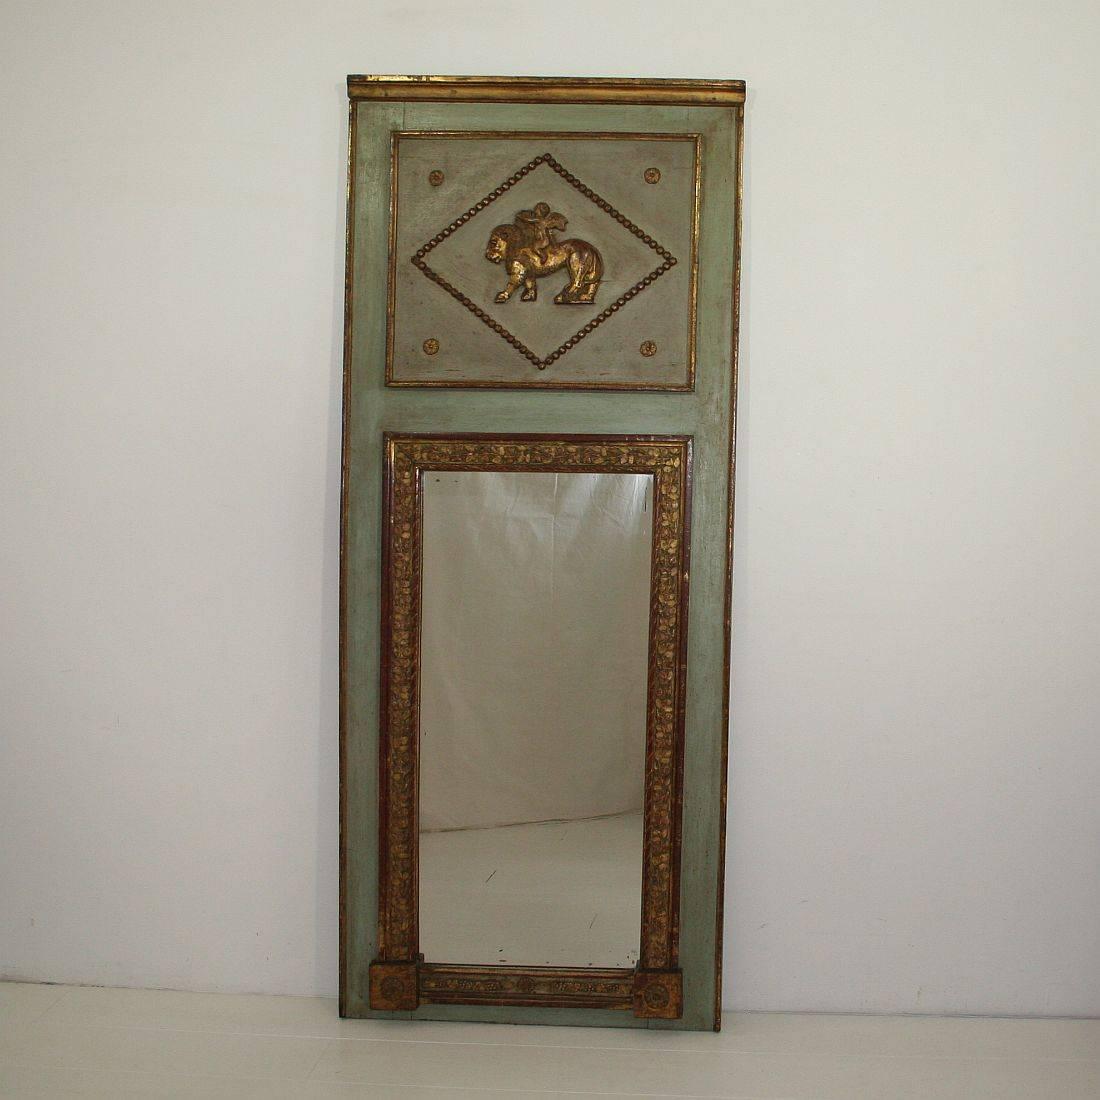 Great classical trumeau mirror with gilded cupid on a lion, France, 19th century. Weathered, old repairs. Wooden frame with chalk/terracotta ornaments.